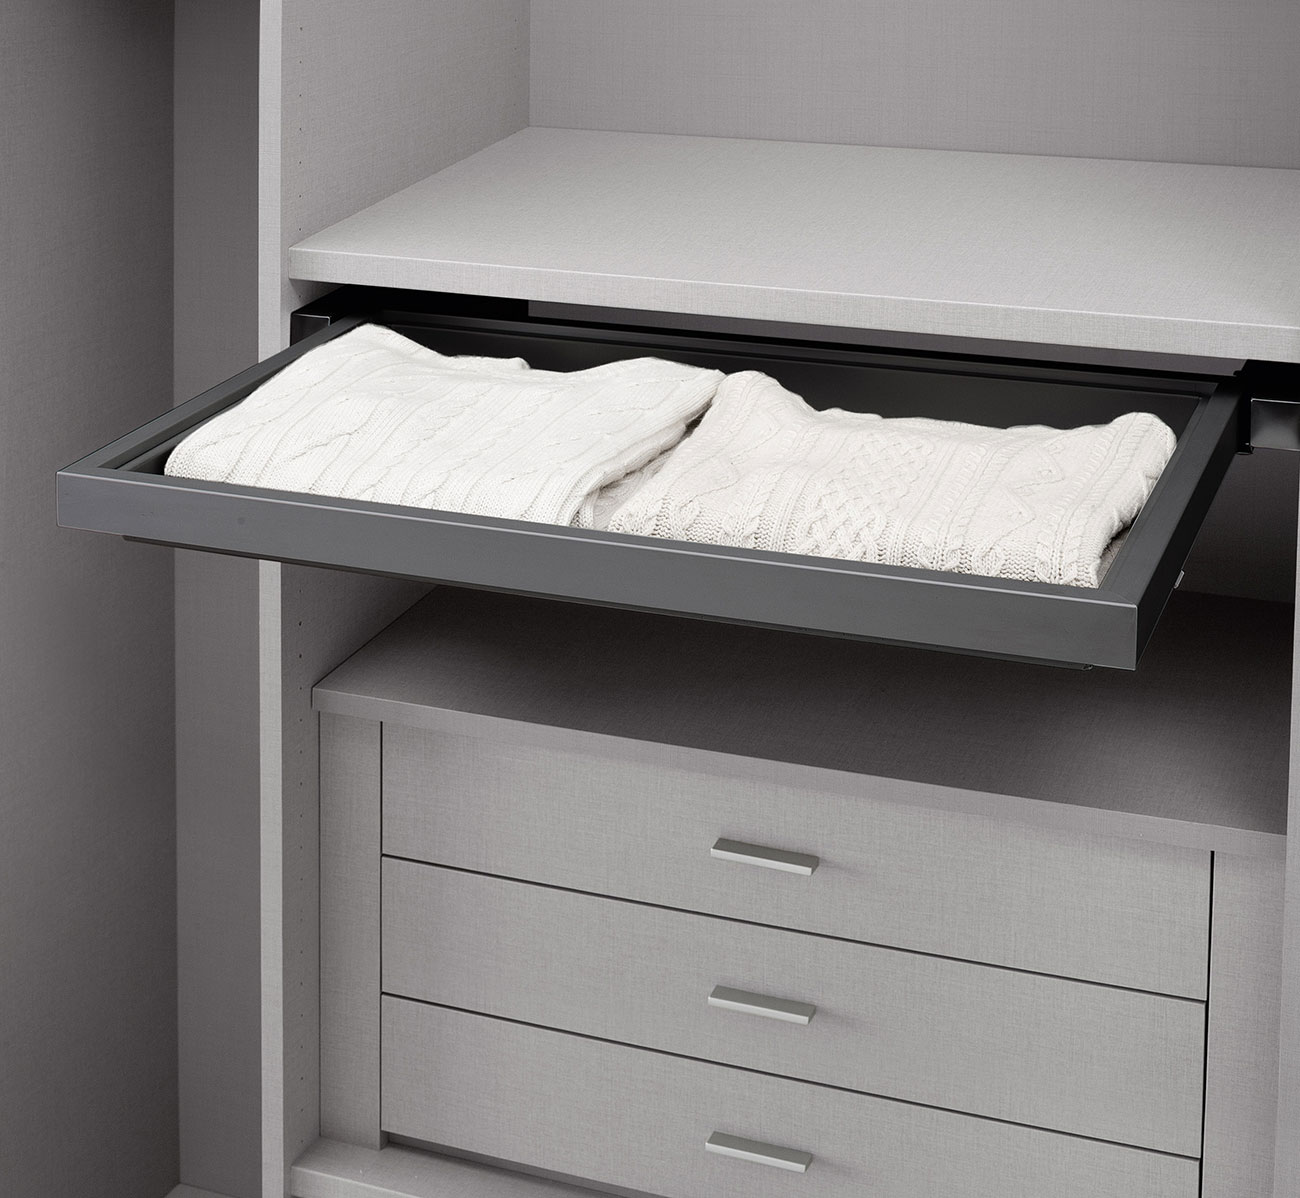 walk-in wardrobe with pull-out tray